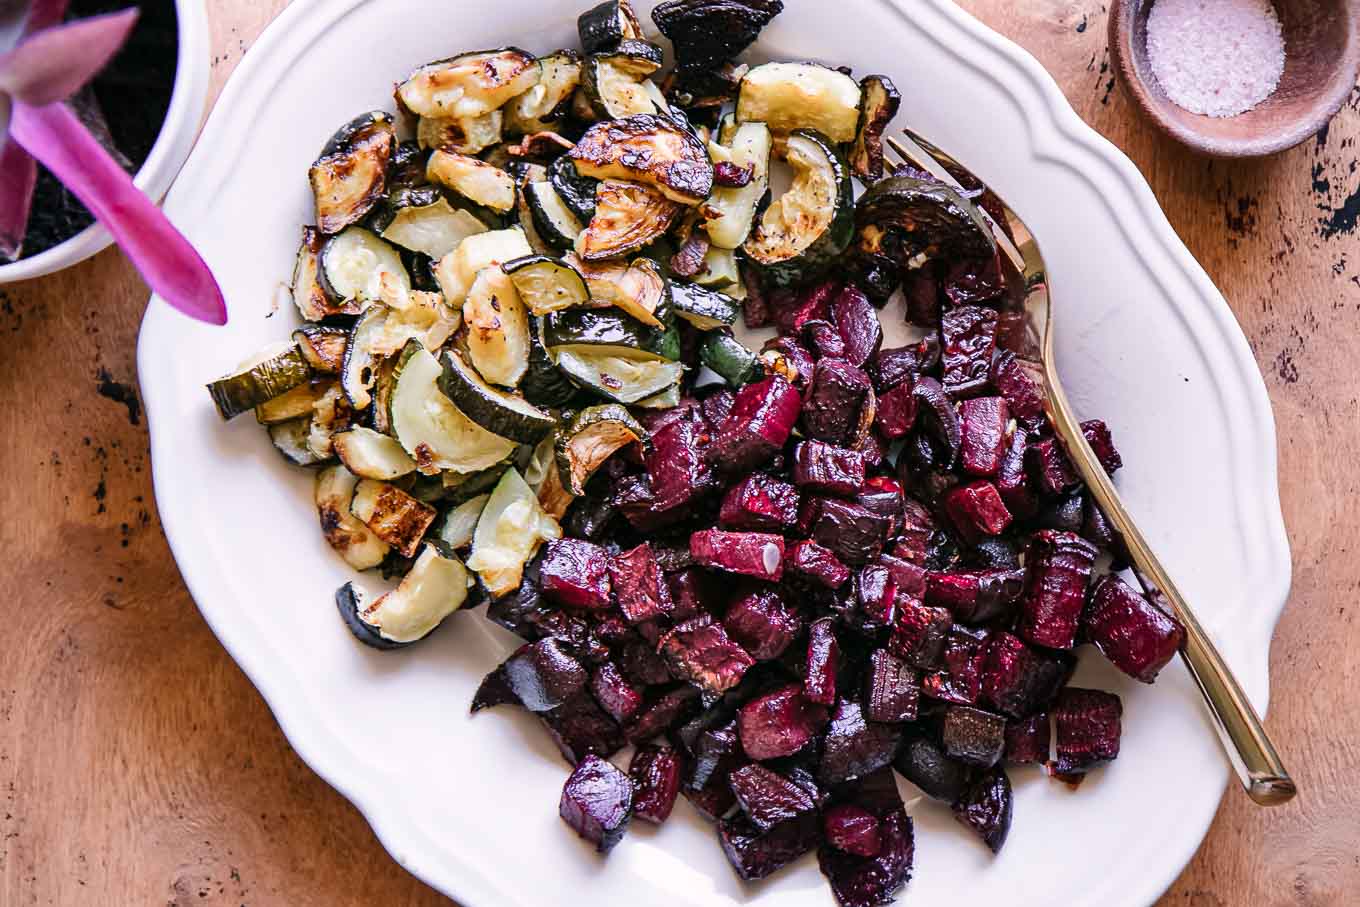 baked zucchini and beets on a white plate on a wood table